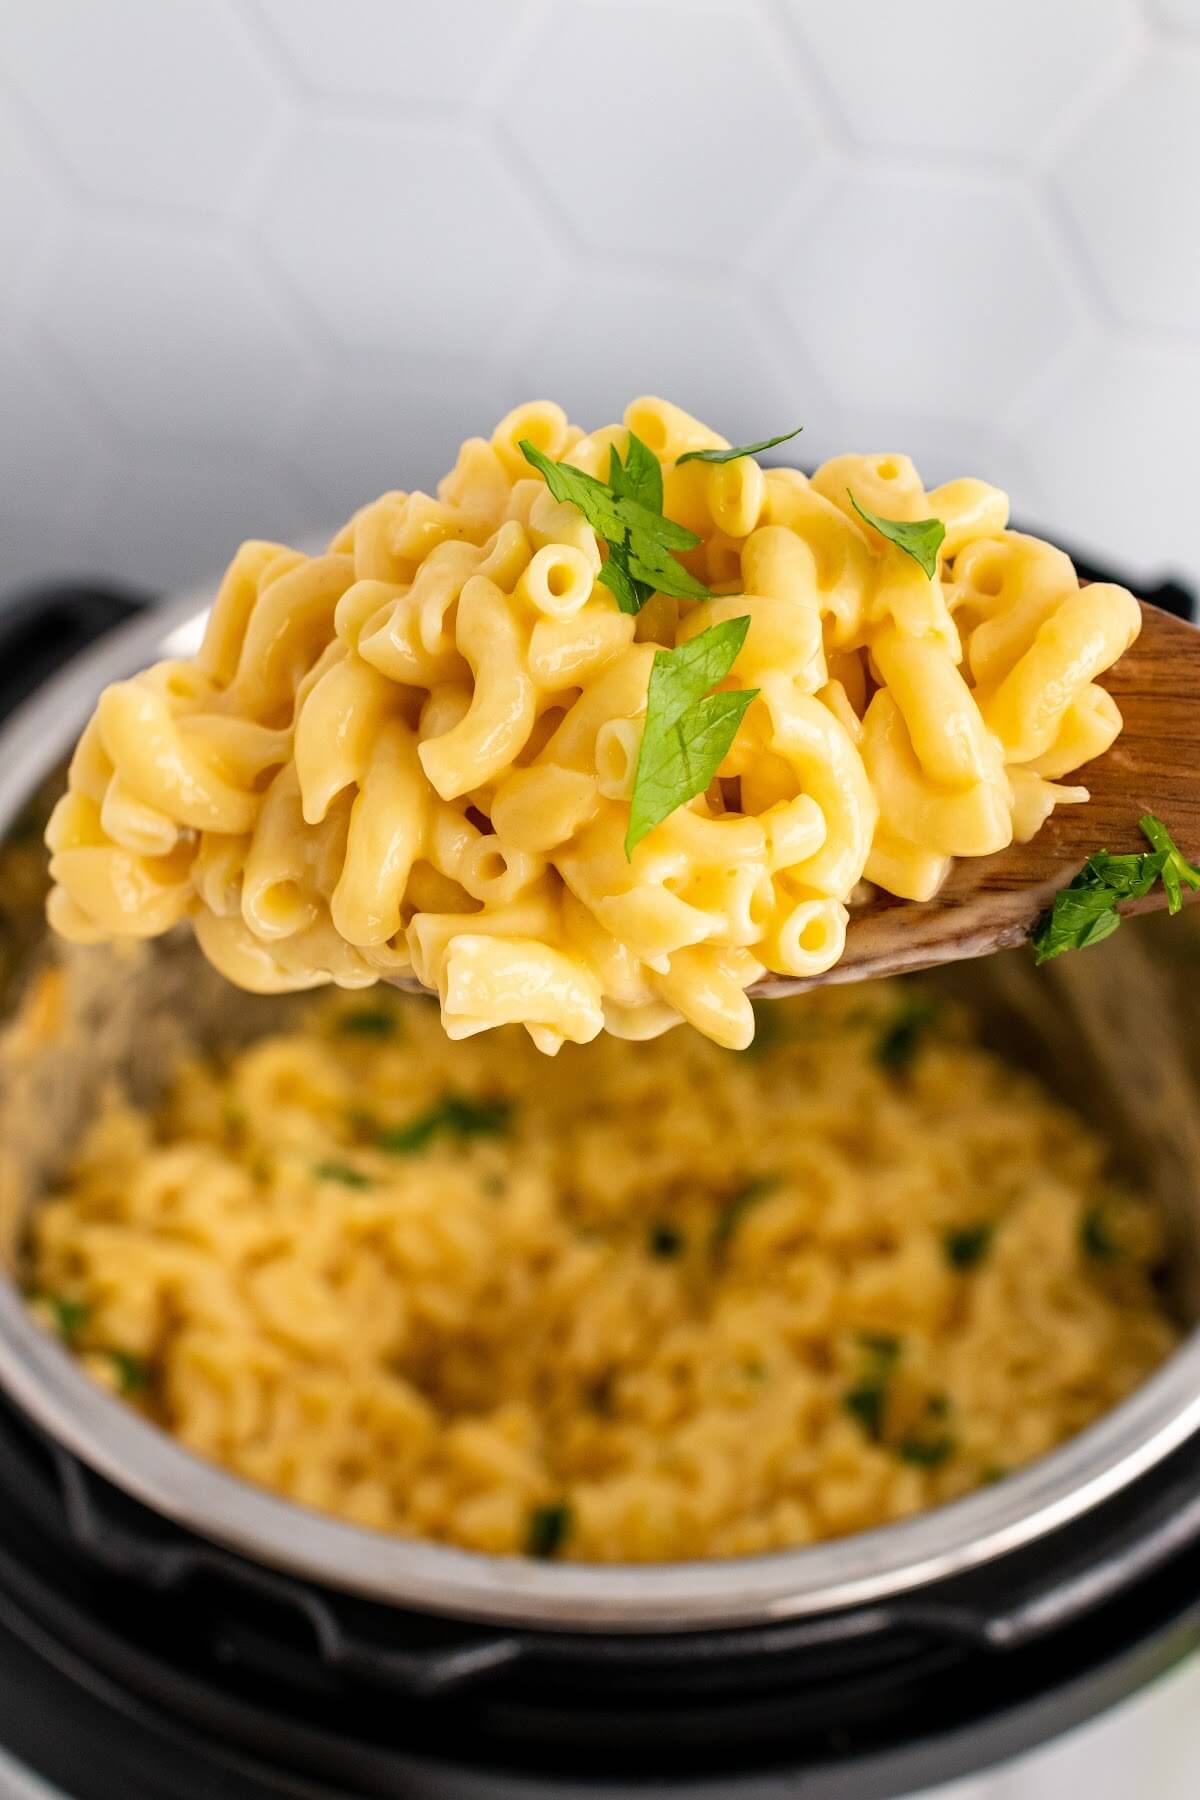 A wooden spoon full of homemade Mac and cheese above an Instant Pot filled with cooked homemade Mac and cheese garnished with fresh parsley.